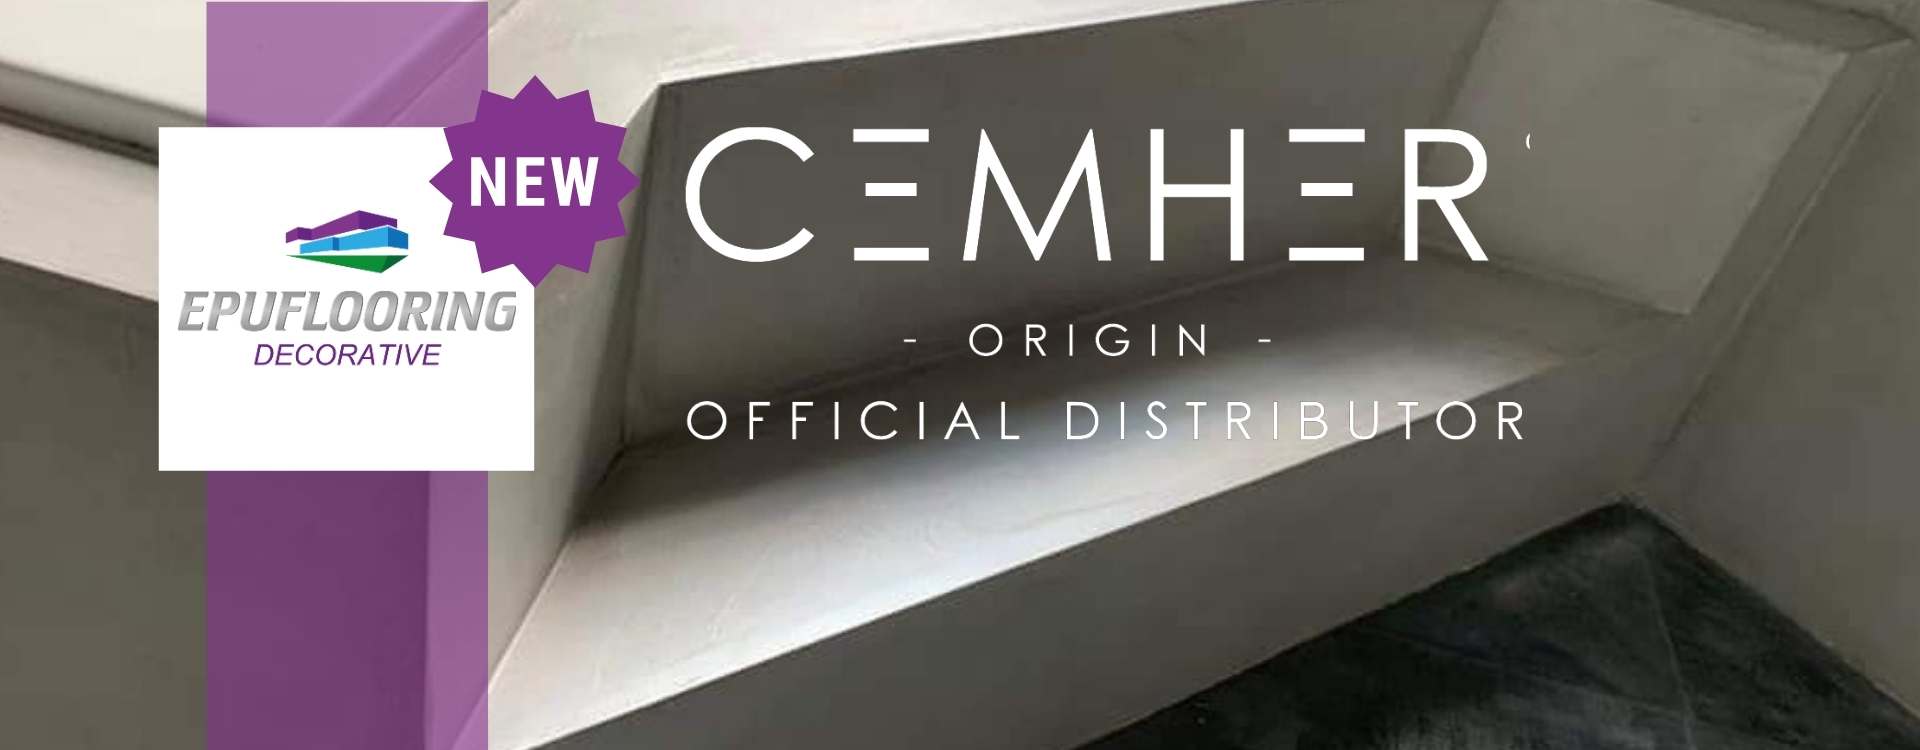 cemher